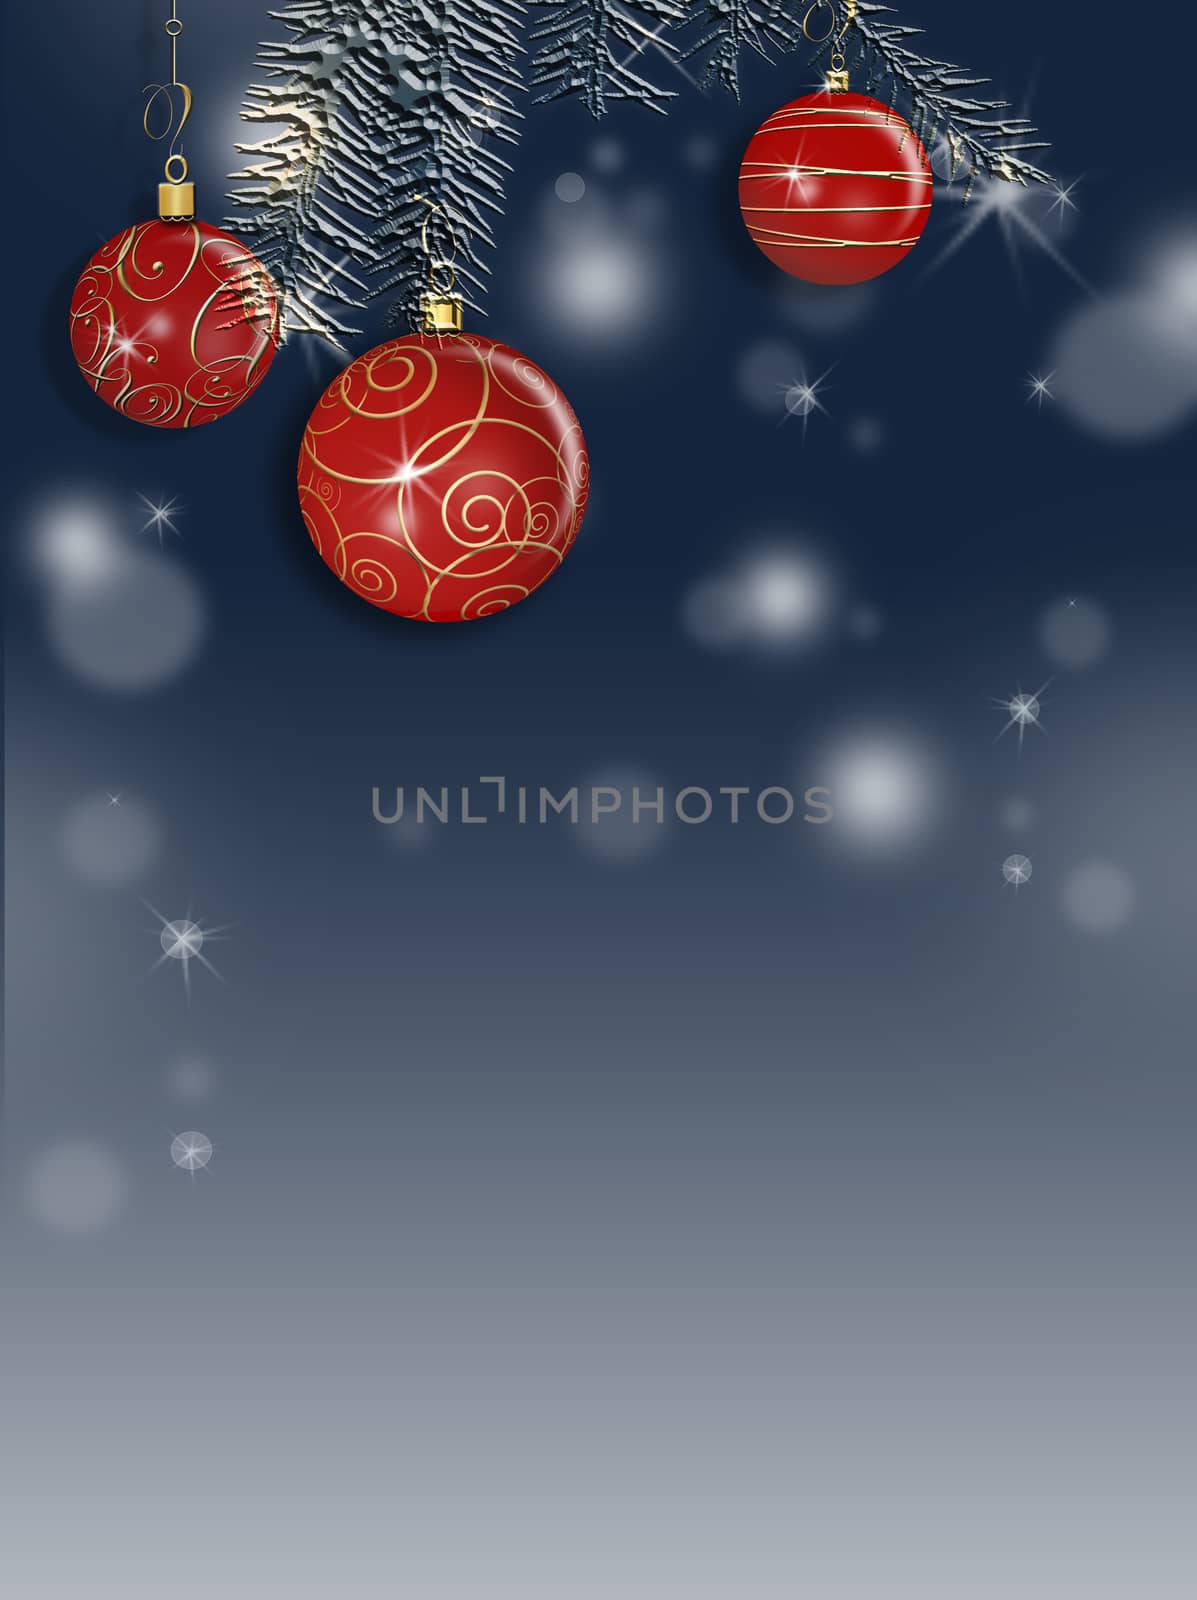 Christmas background with snow fir tree branch, realistic red balls, gift tag on pastel blue background with bokeh. Copy space. 3D render